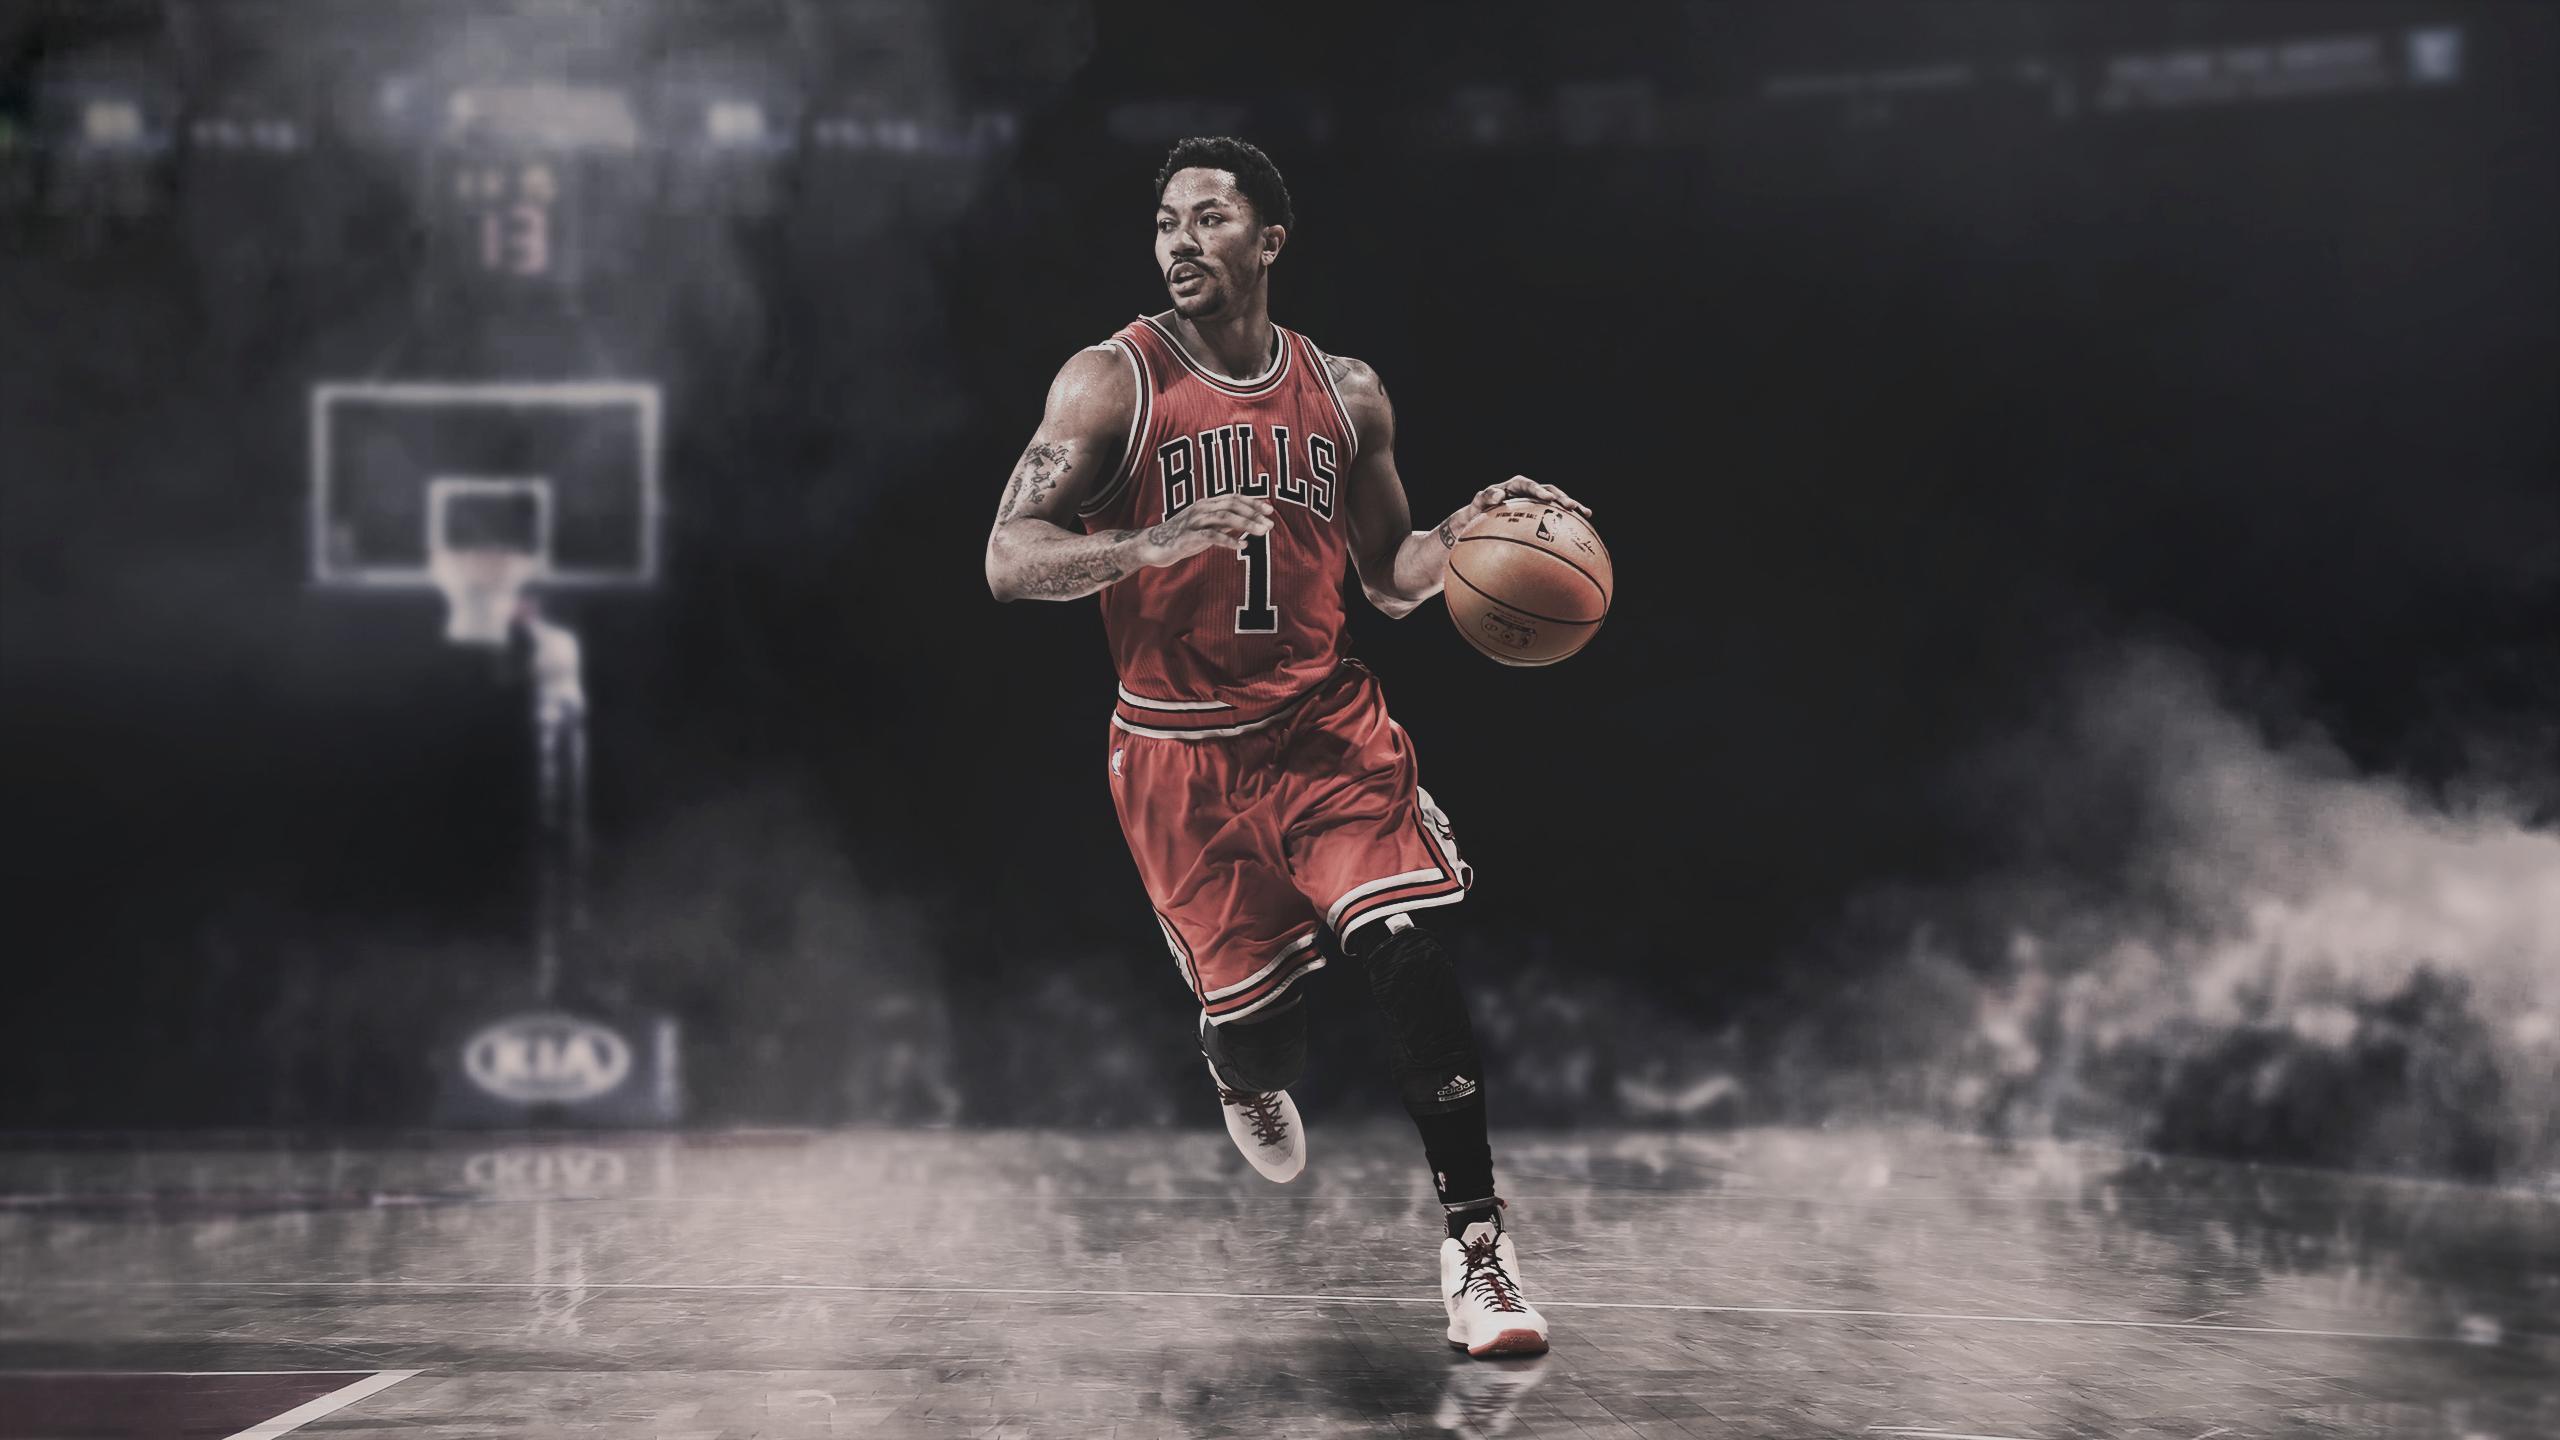 30+ Derrick Rose HD Wallpapers and Backgrounds